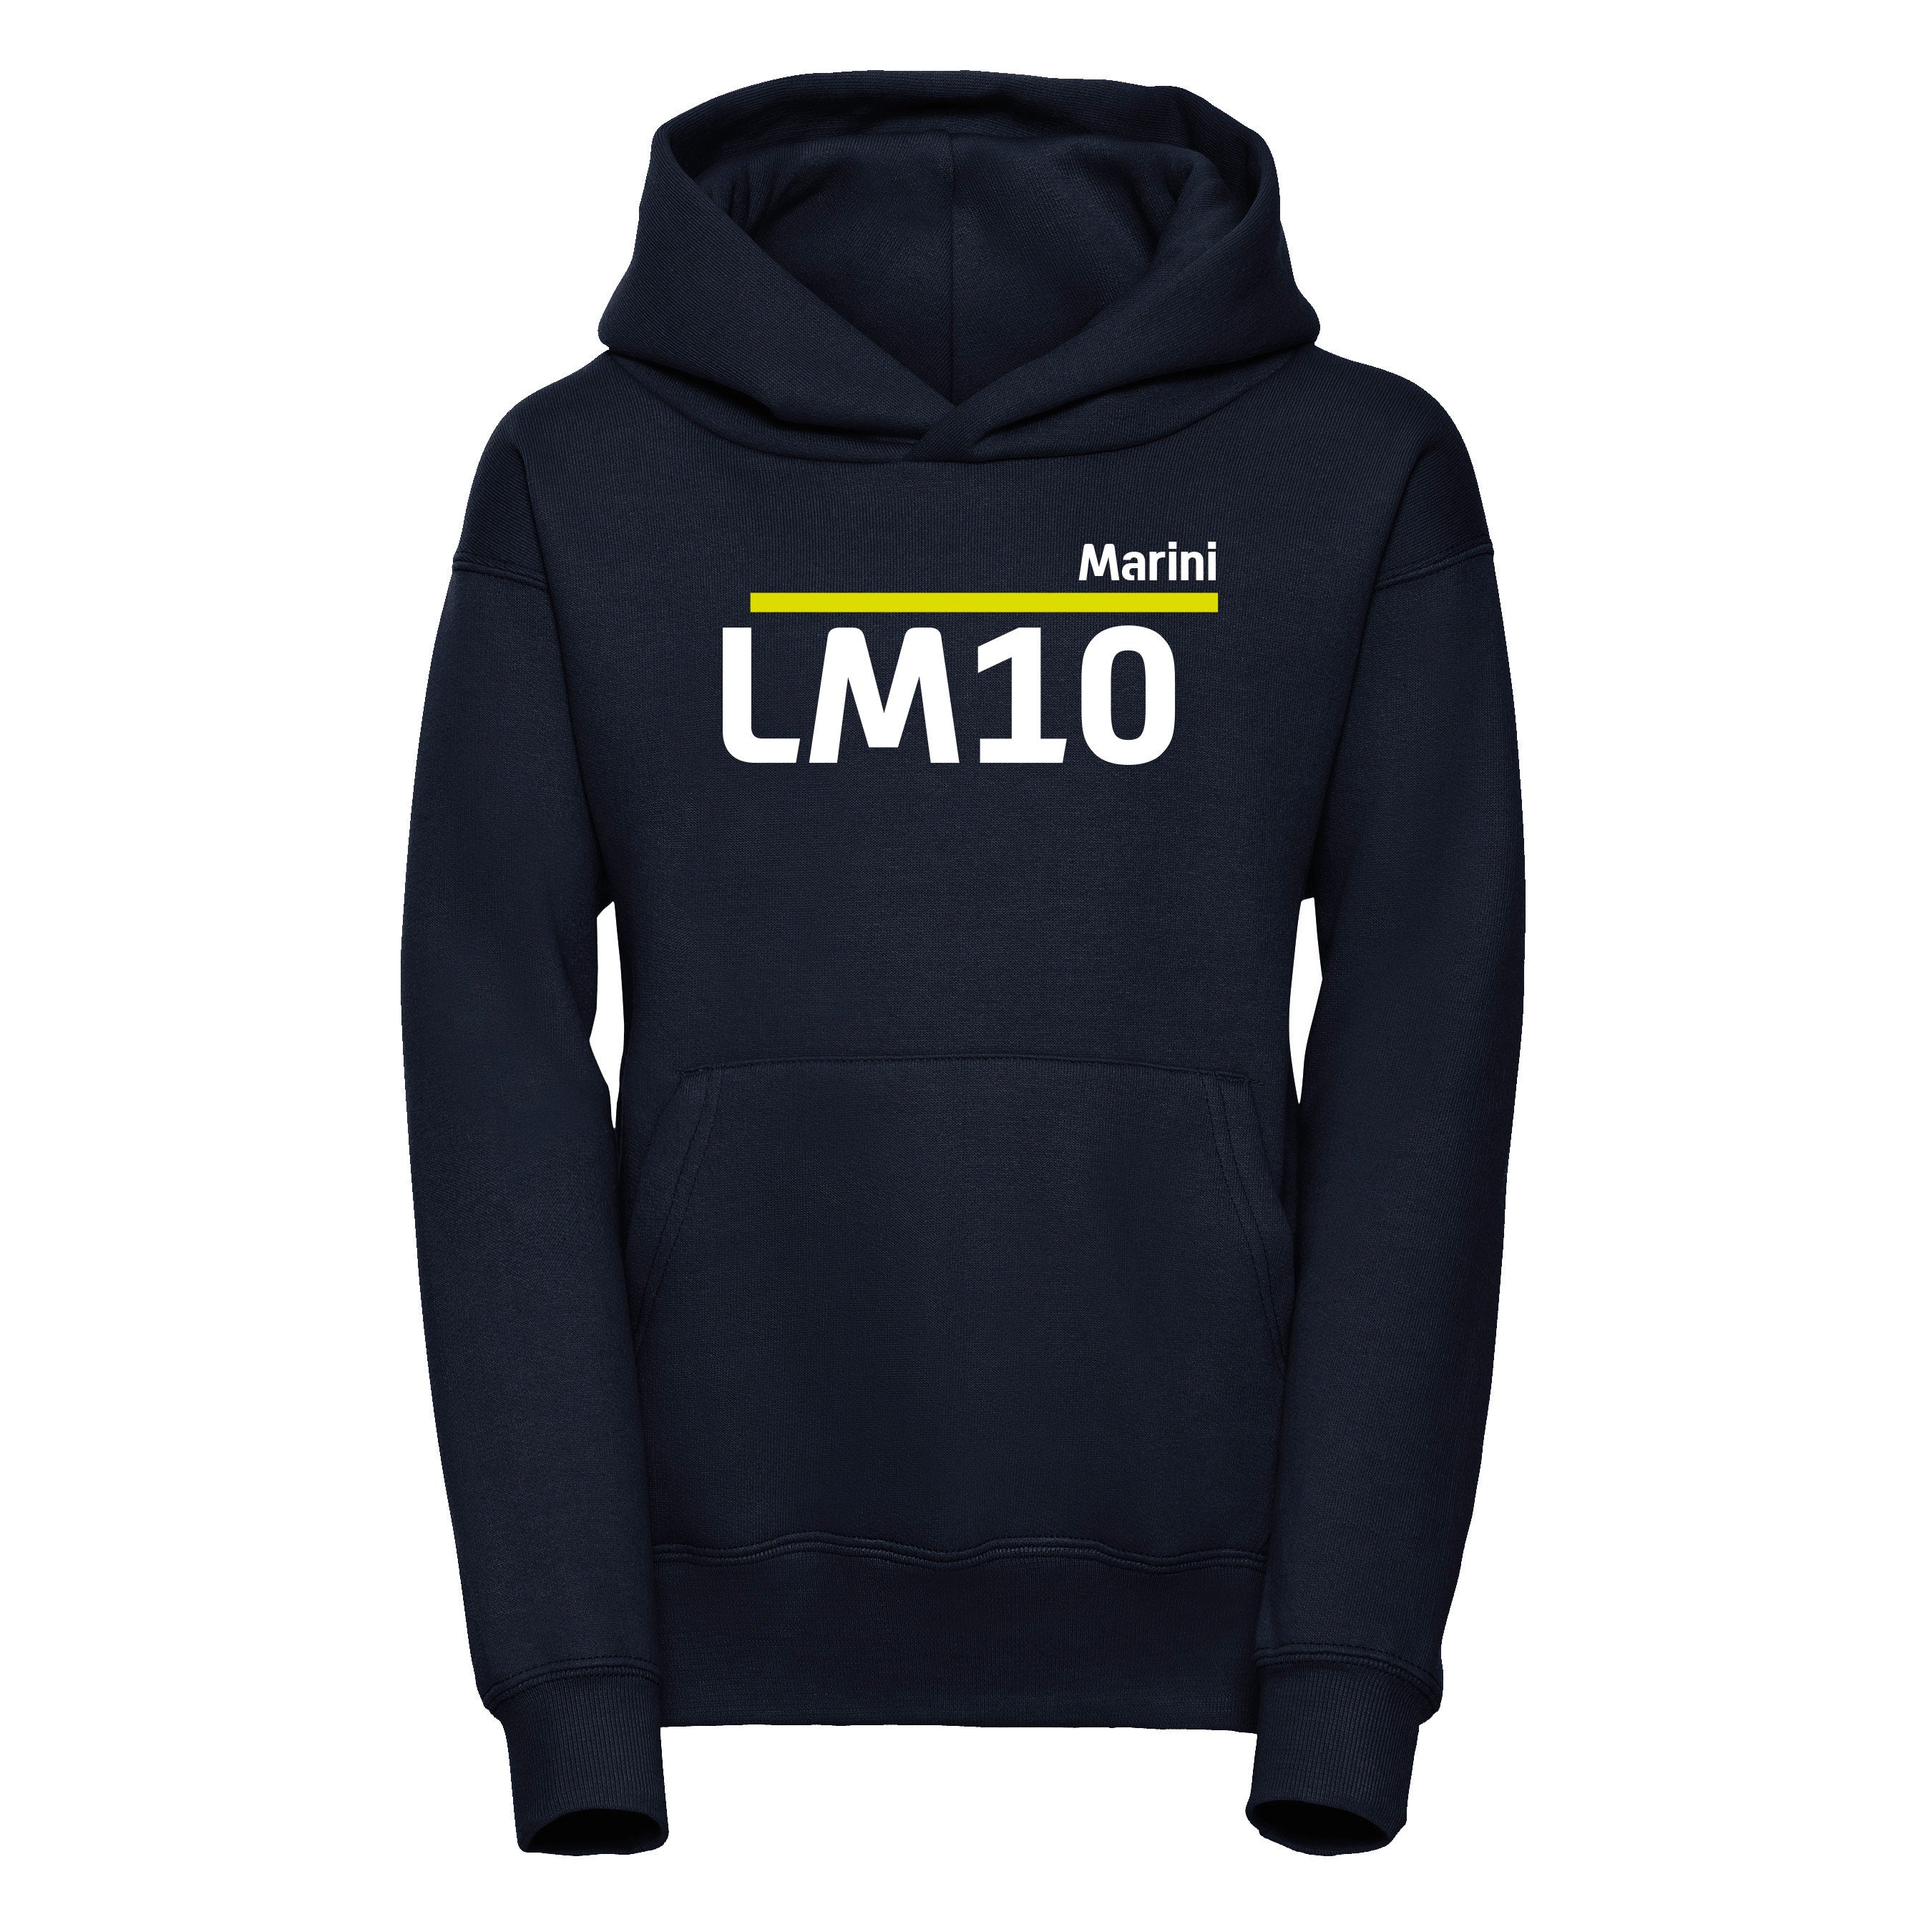 Lm10 -  UK